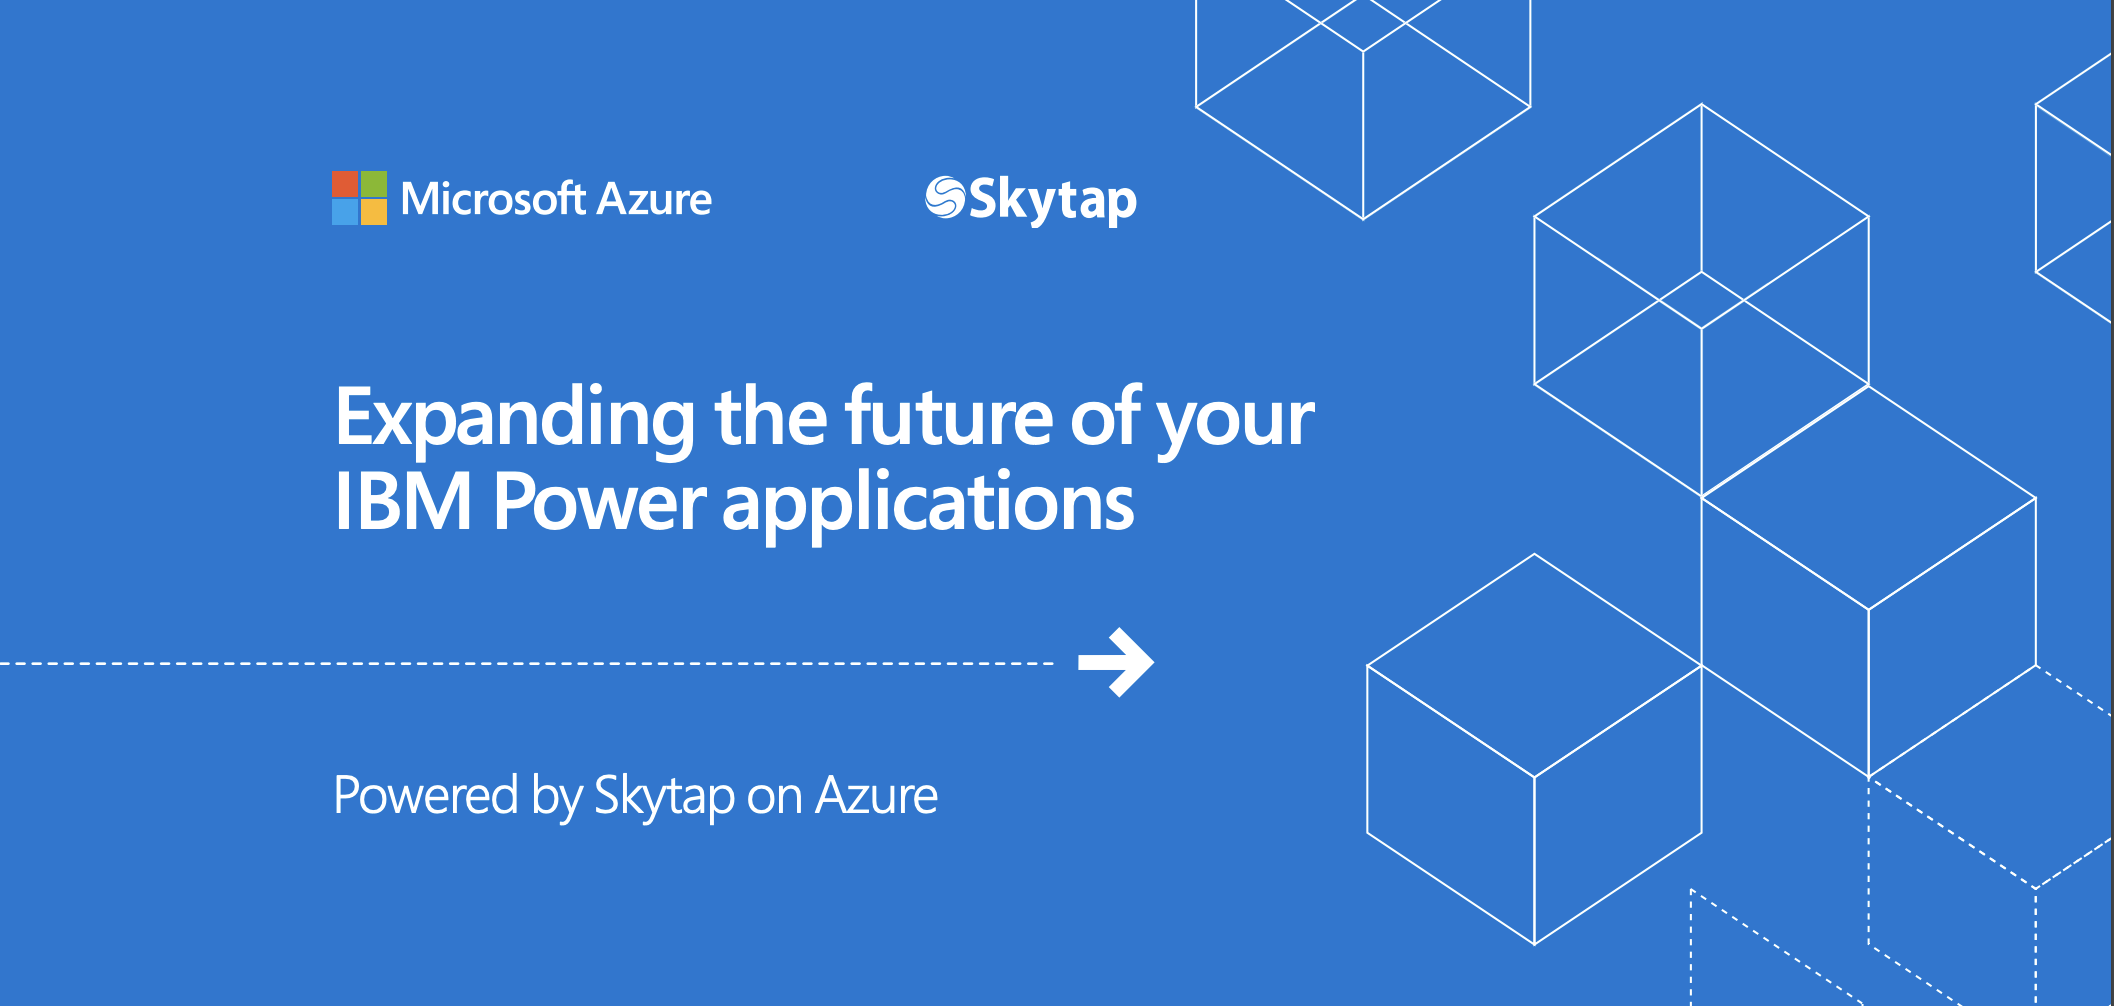 Expanding the future of your IBM Power applications